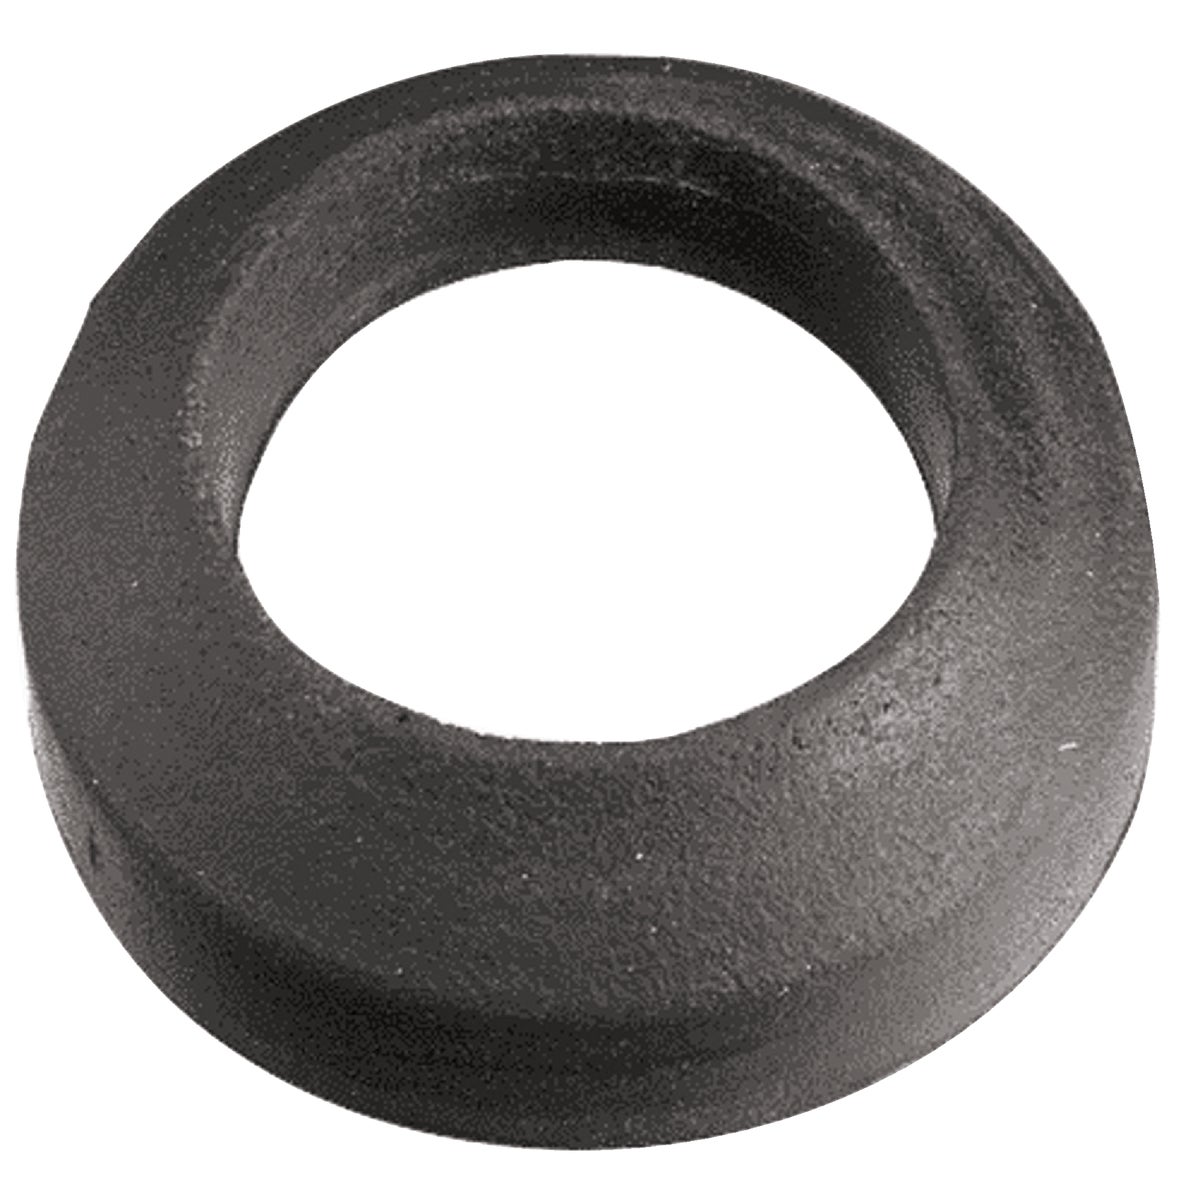 Item 455113, Tank to bowl gasket for American Standard brand toilets.